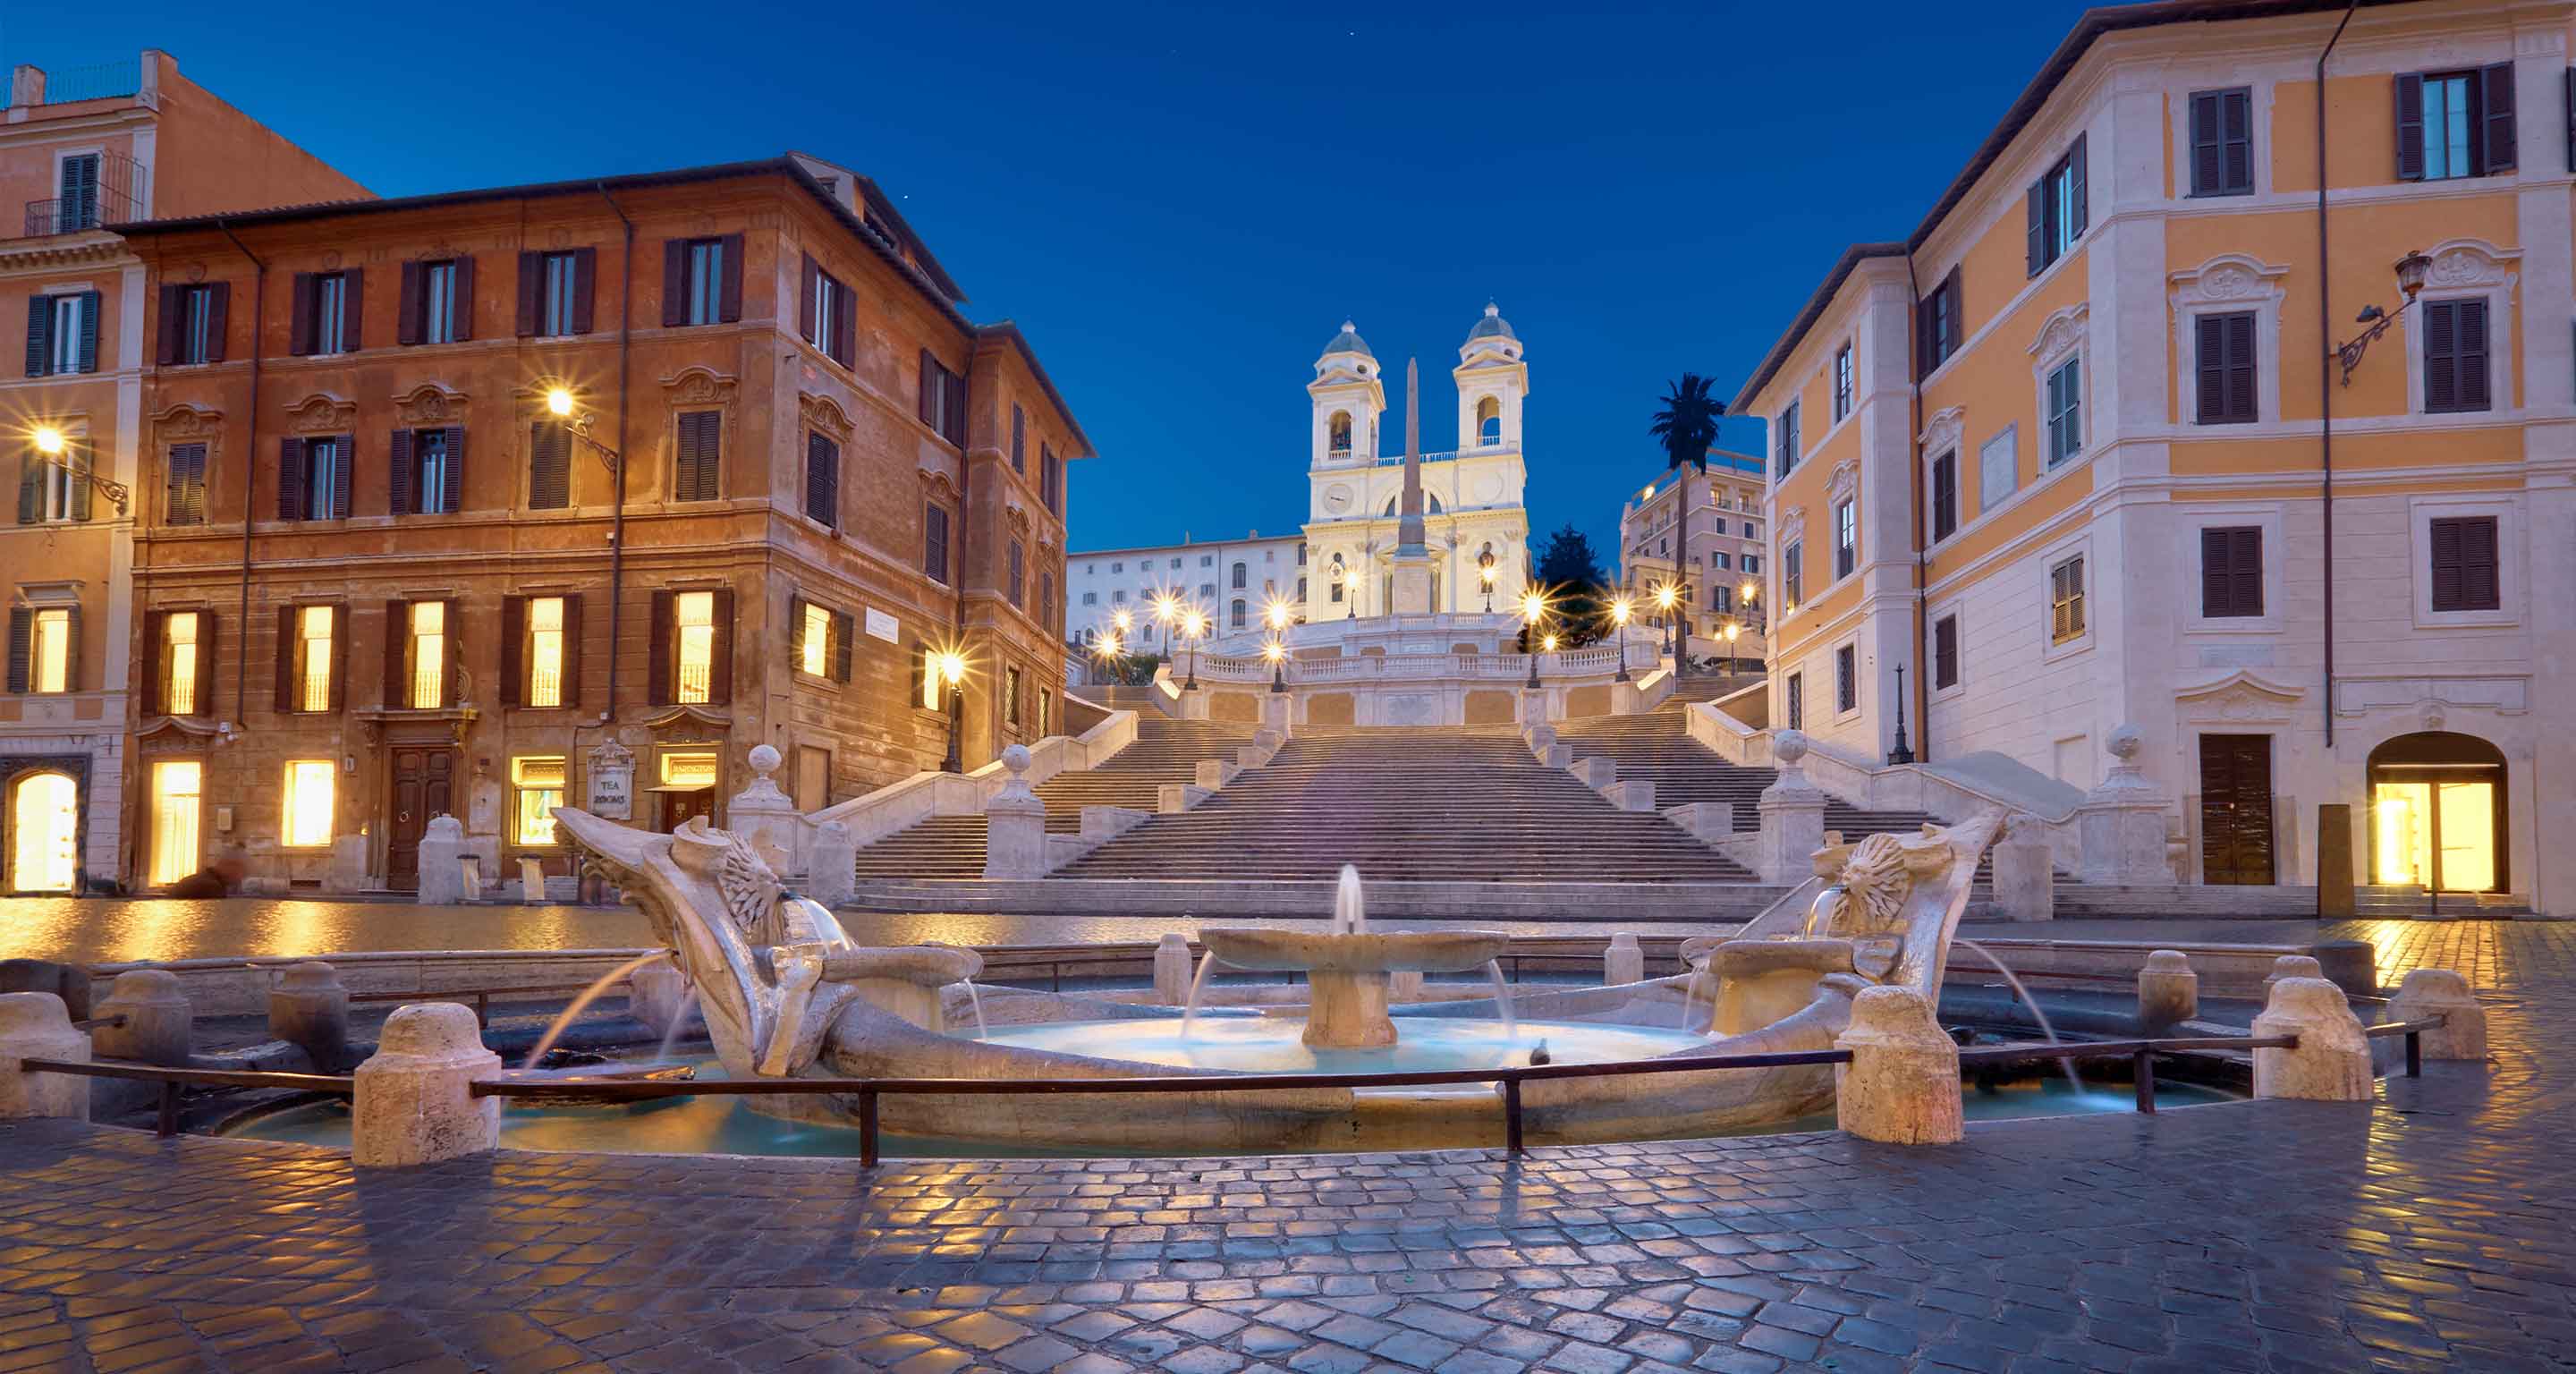 Piazza di Spagna by evening light.